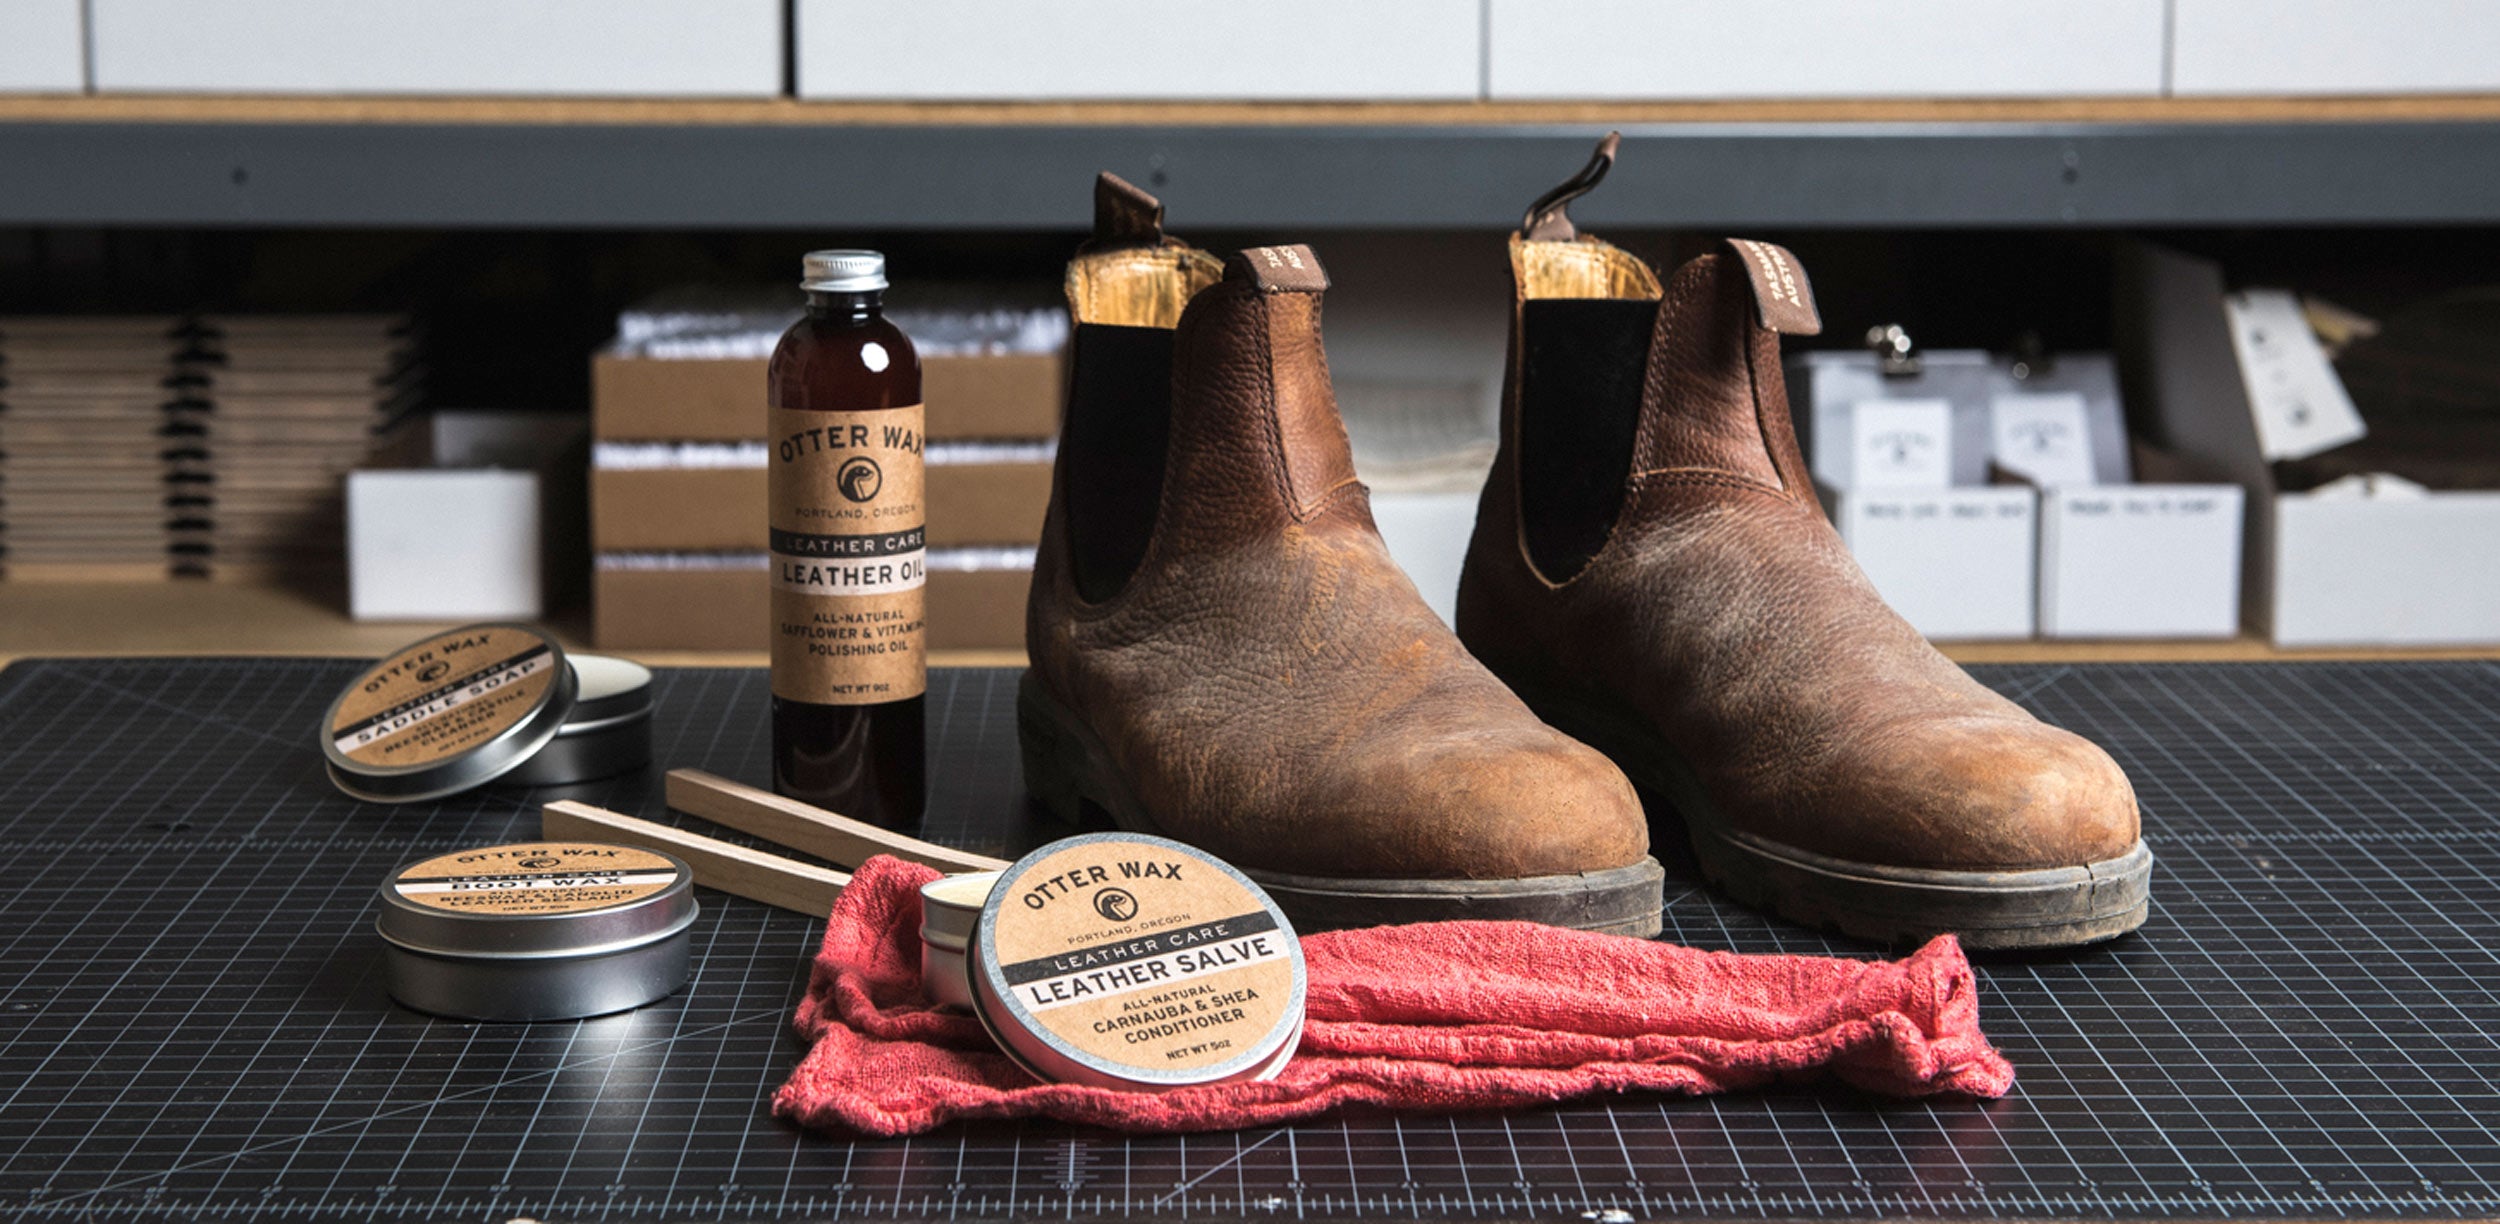 How To Clean Leather Blundstone Boots With Otter Wax Saddle Soap